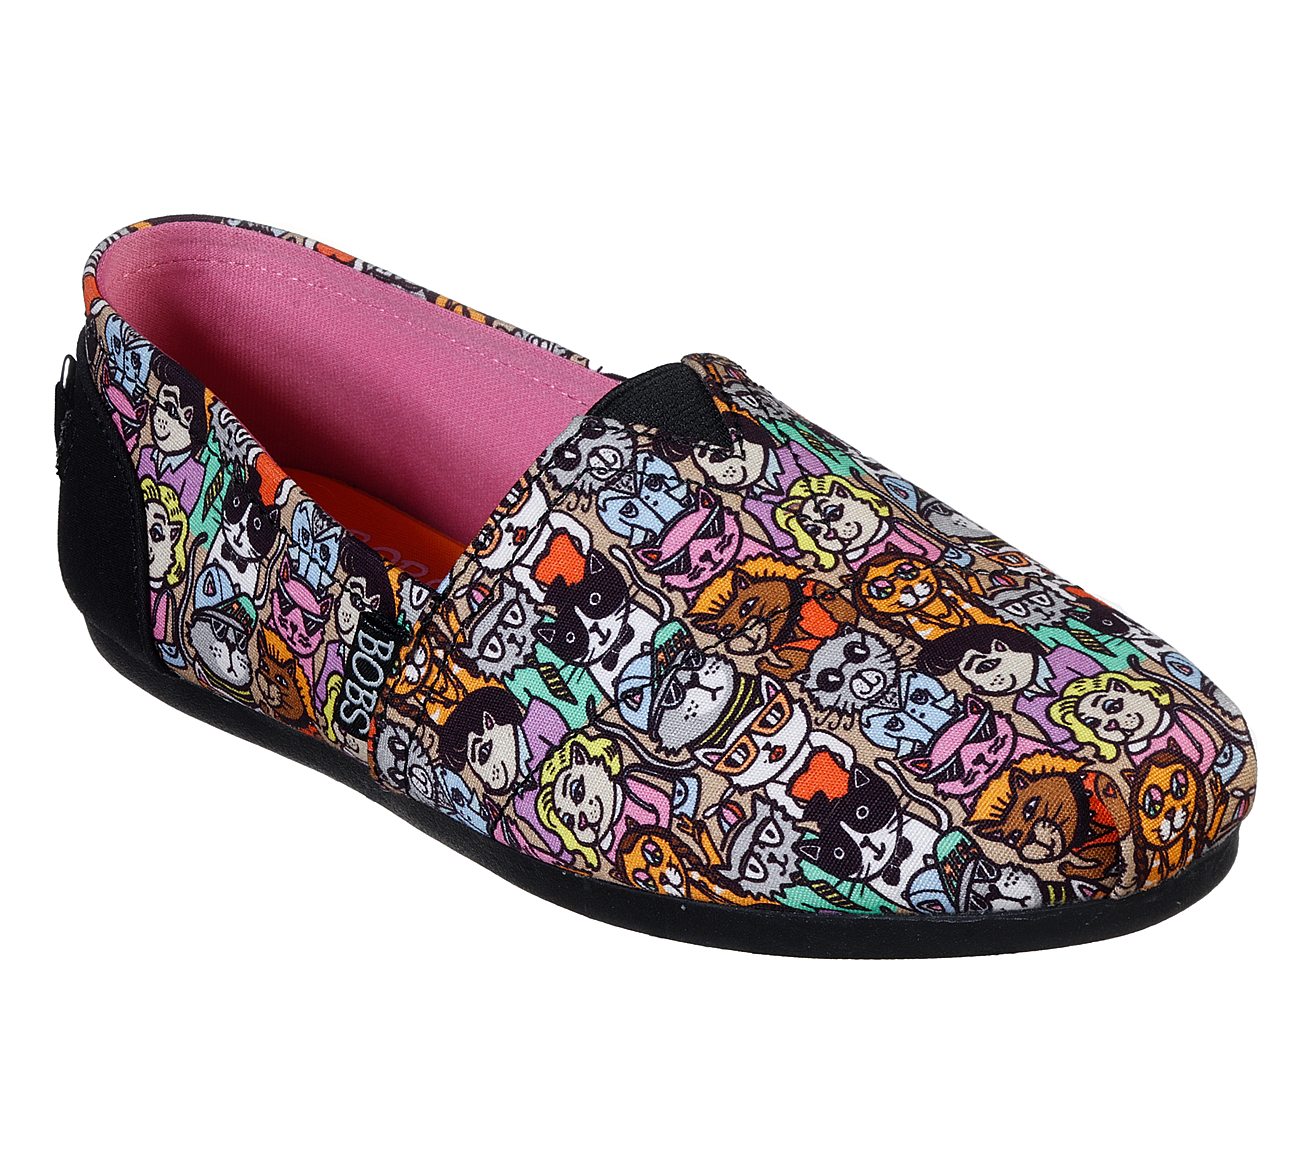 Buy SKECHERS BOBS Plush Cats of Ages BOBS Shoes